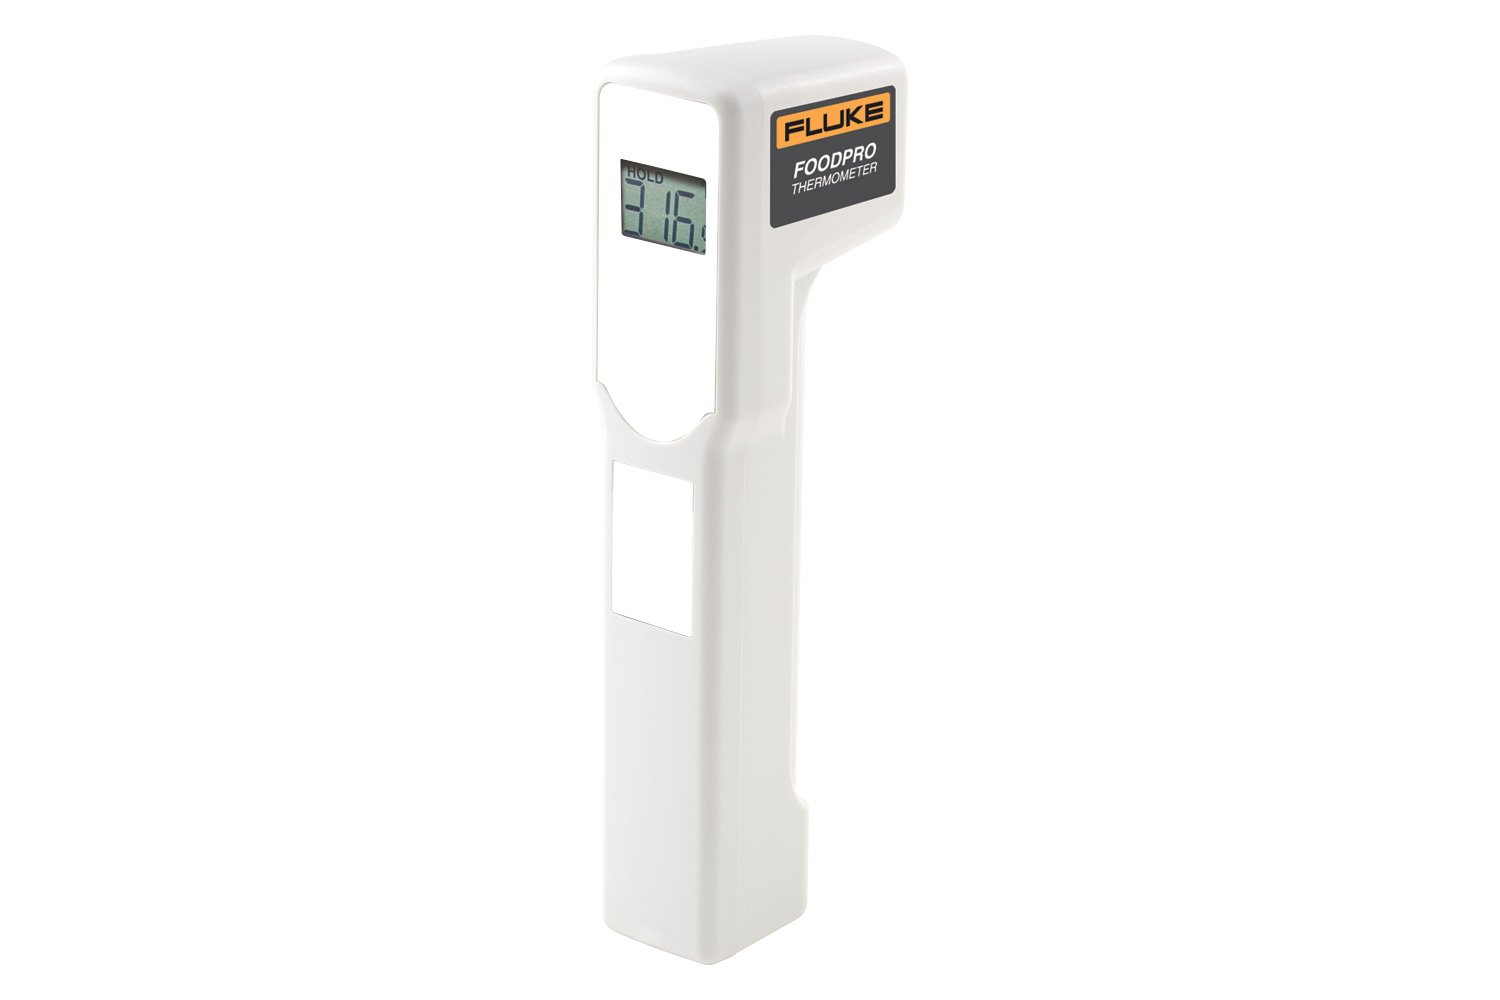 Fluke FoodPro Plus Infrared Thermometer, Handheld Infrared Thermometers